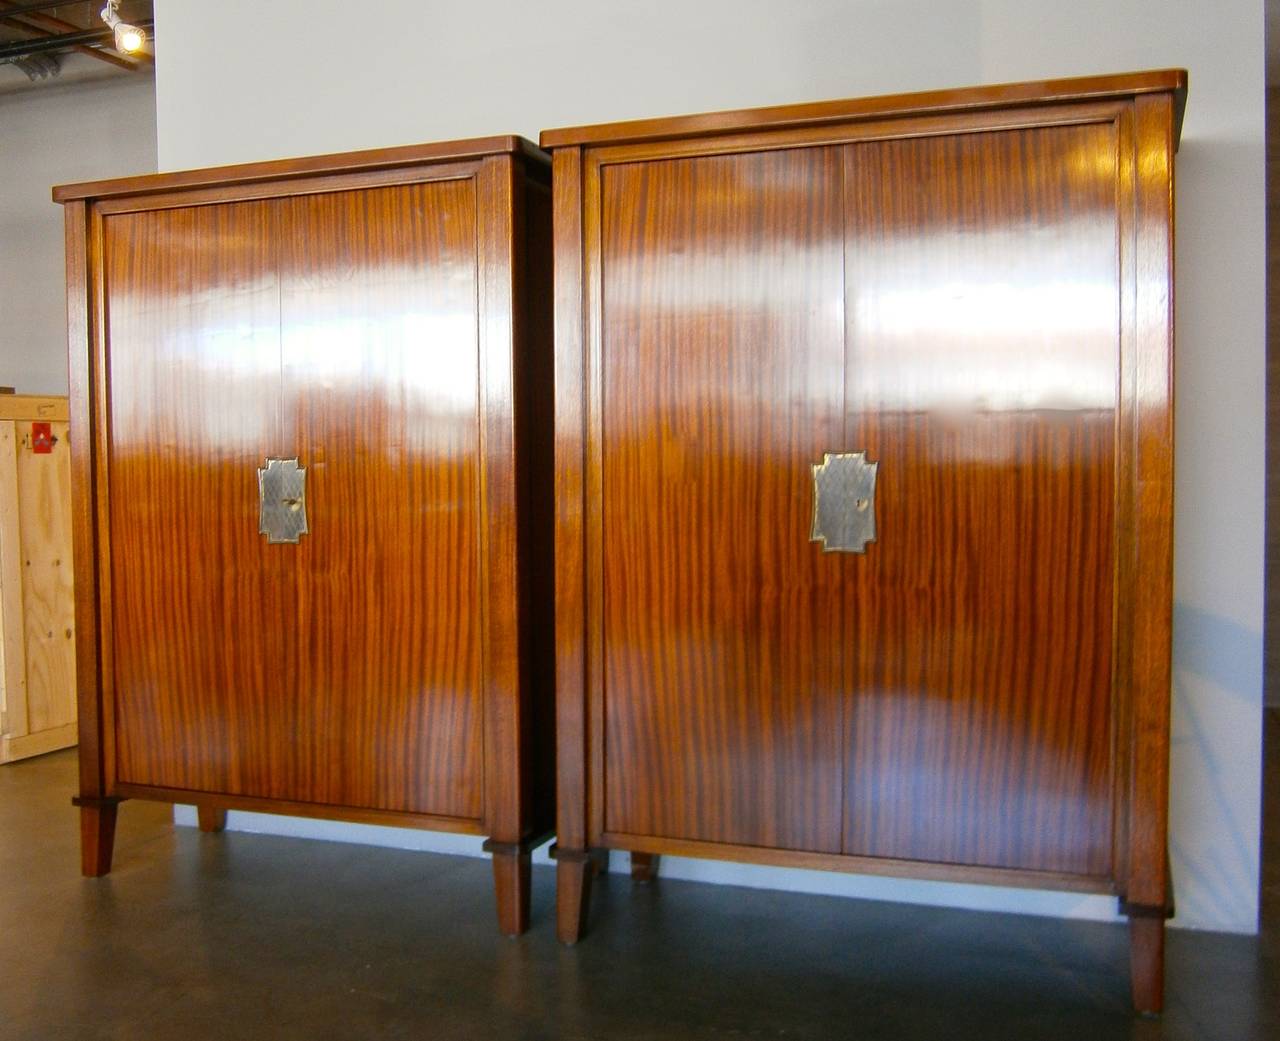 A fantastic pair of French Art Moderne cabinets with gilt metal escutcheons attributed to Gilbert Poillerat  C.1940s. The cabinets were made from choice "ribbon" mahogany and the interiors are veneered in sycamore.  One cabinet has